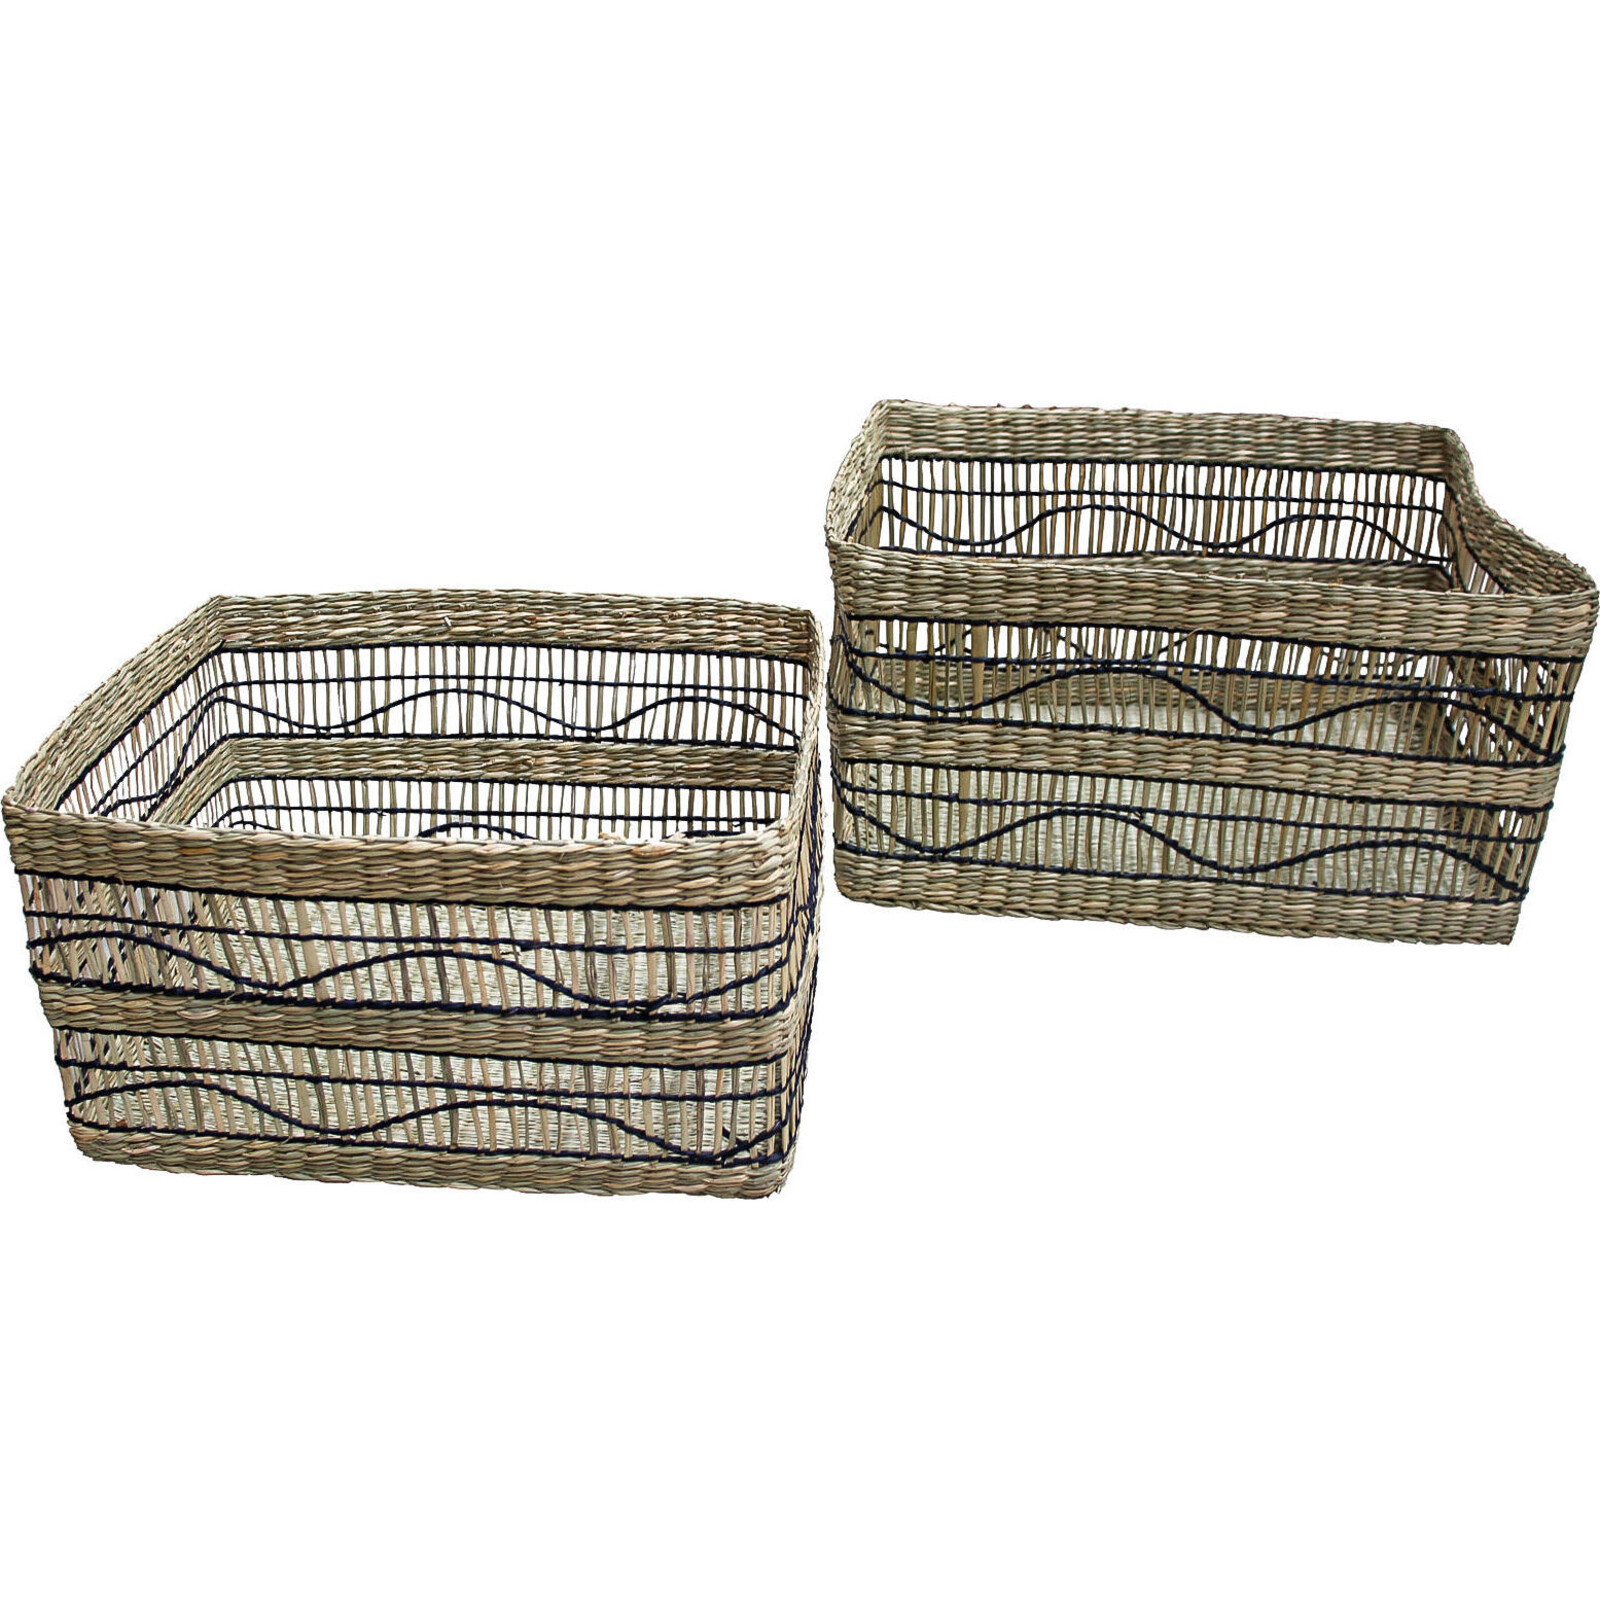 Woven Seagrass Rect Basket S/2